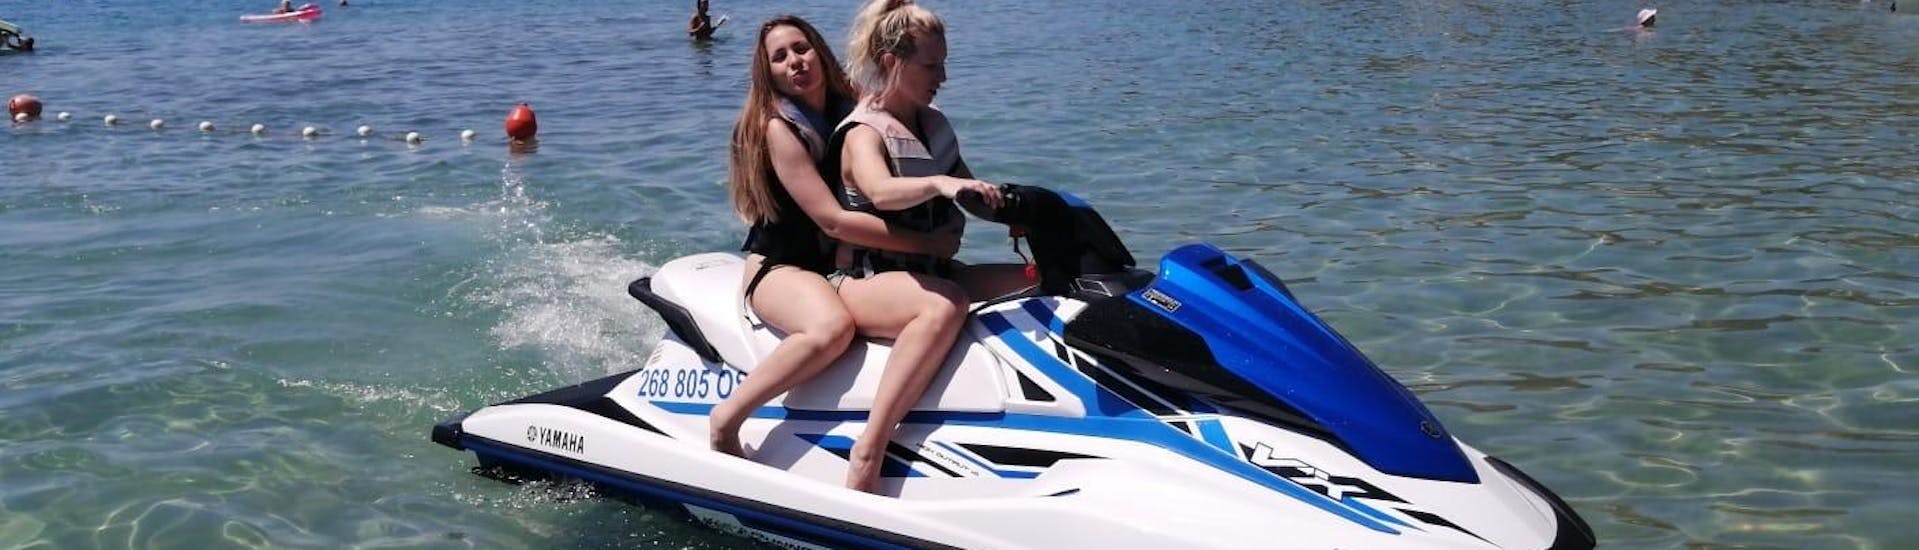 Two woman are on a jet ski hired from Adventure Croatia.